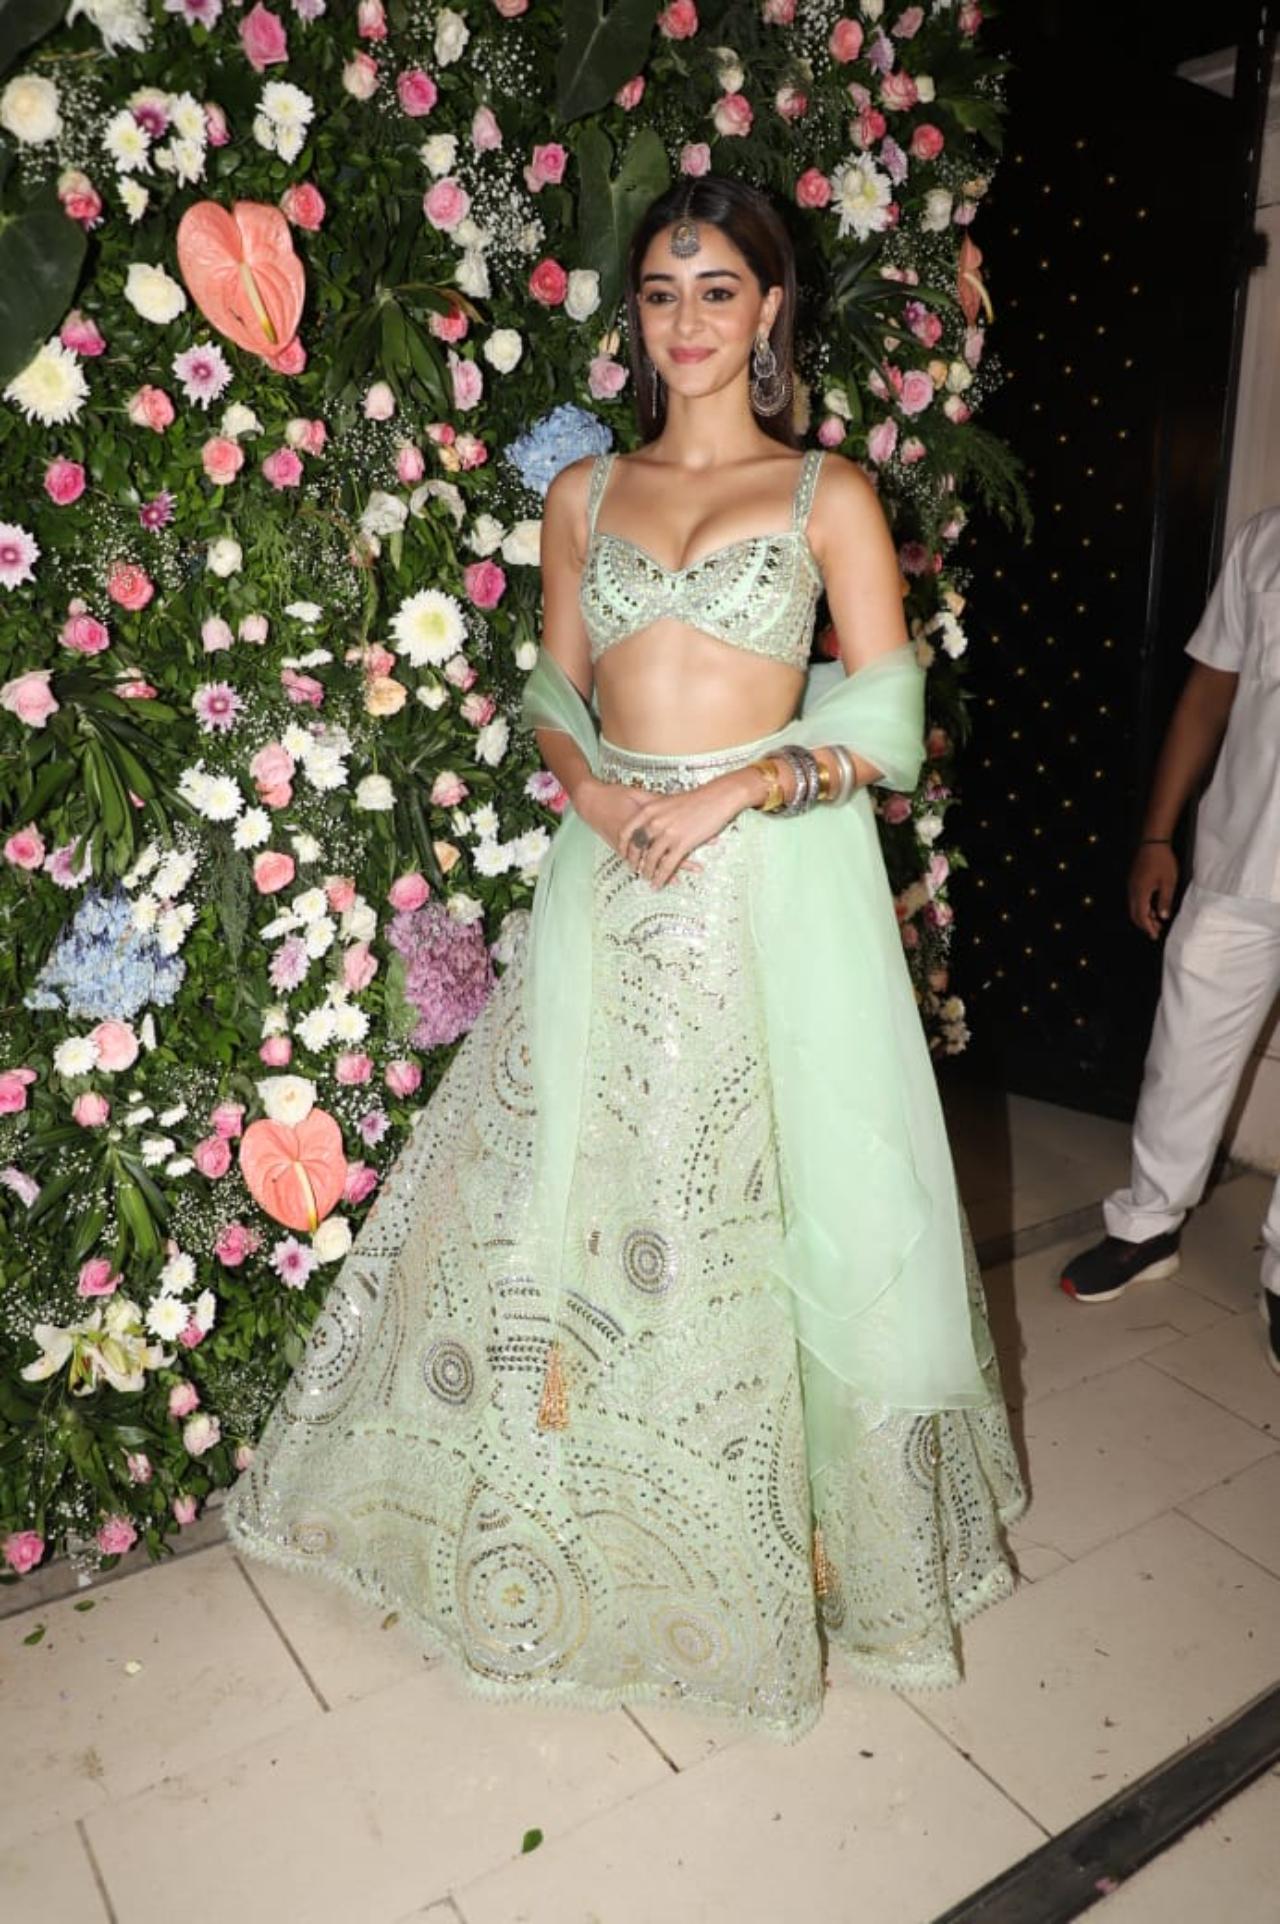 Ananya Panday arrived solo dressed in a light green lehenga